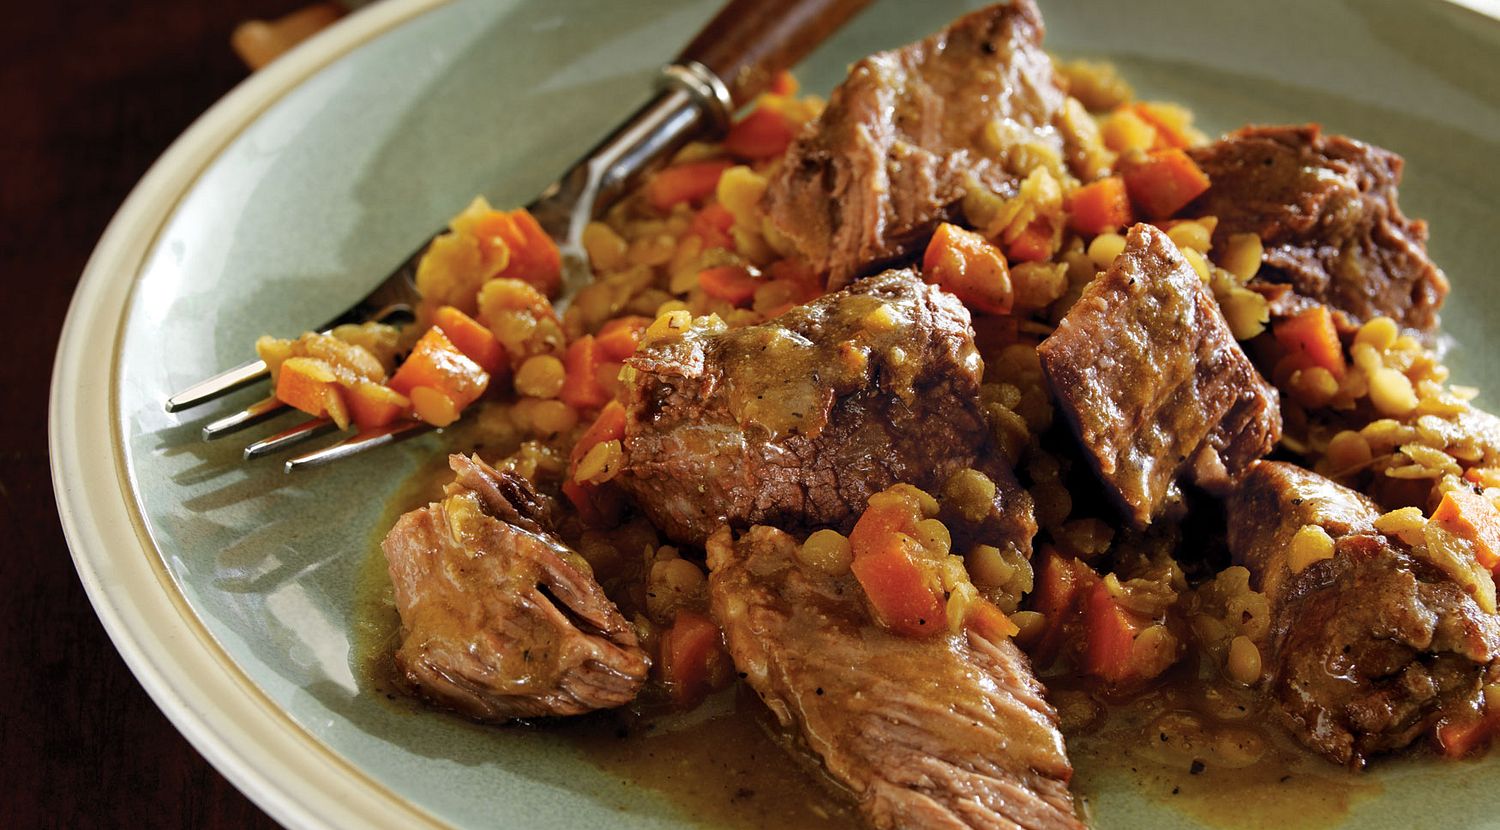 Braised Chuck Steaks with Savory Lentils